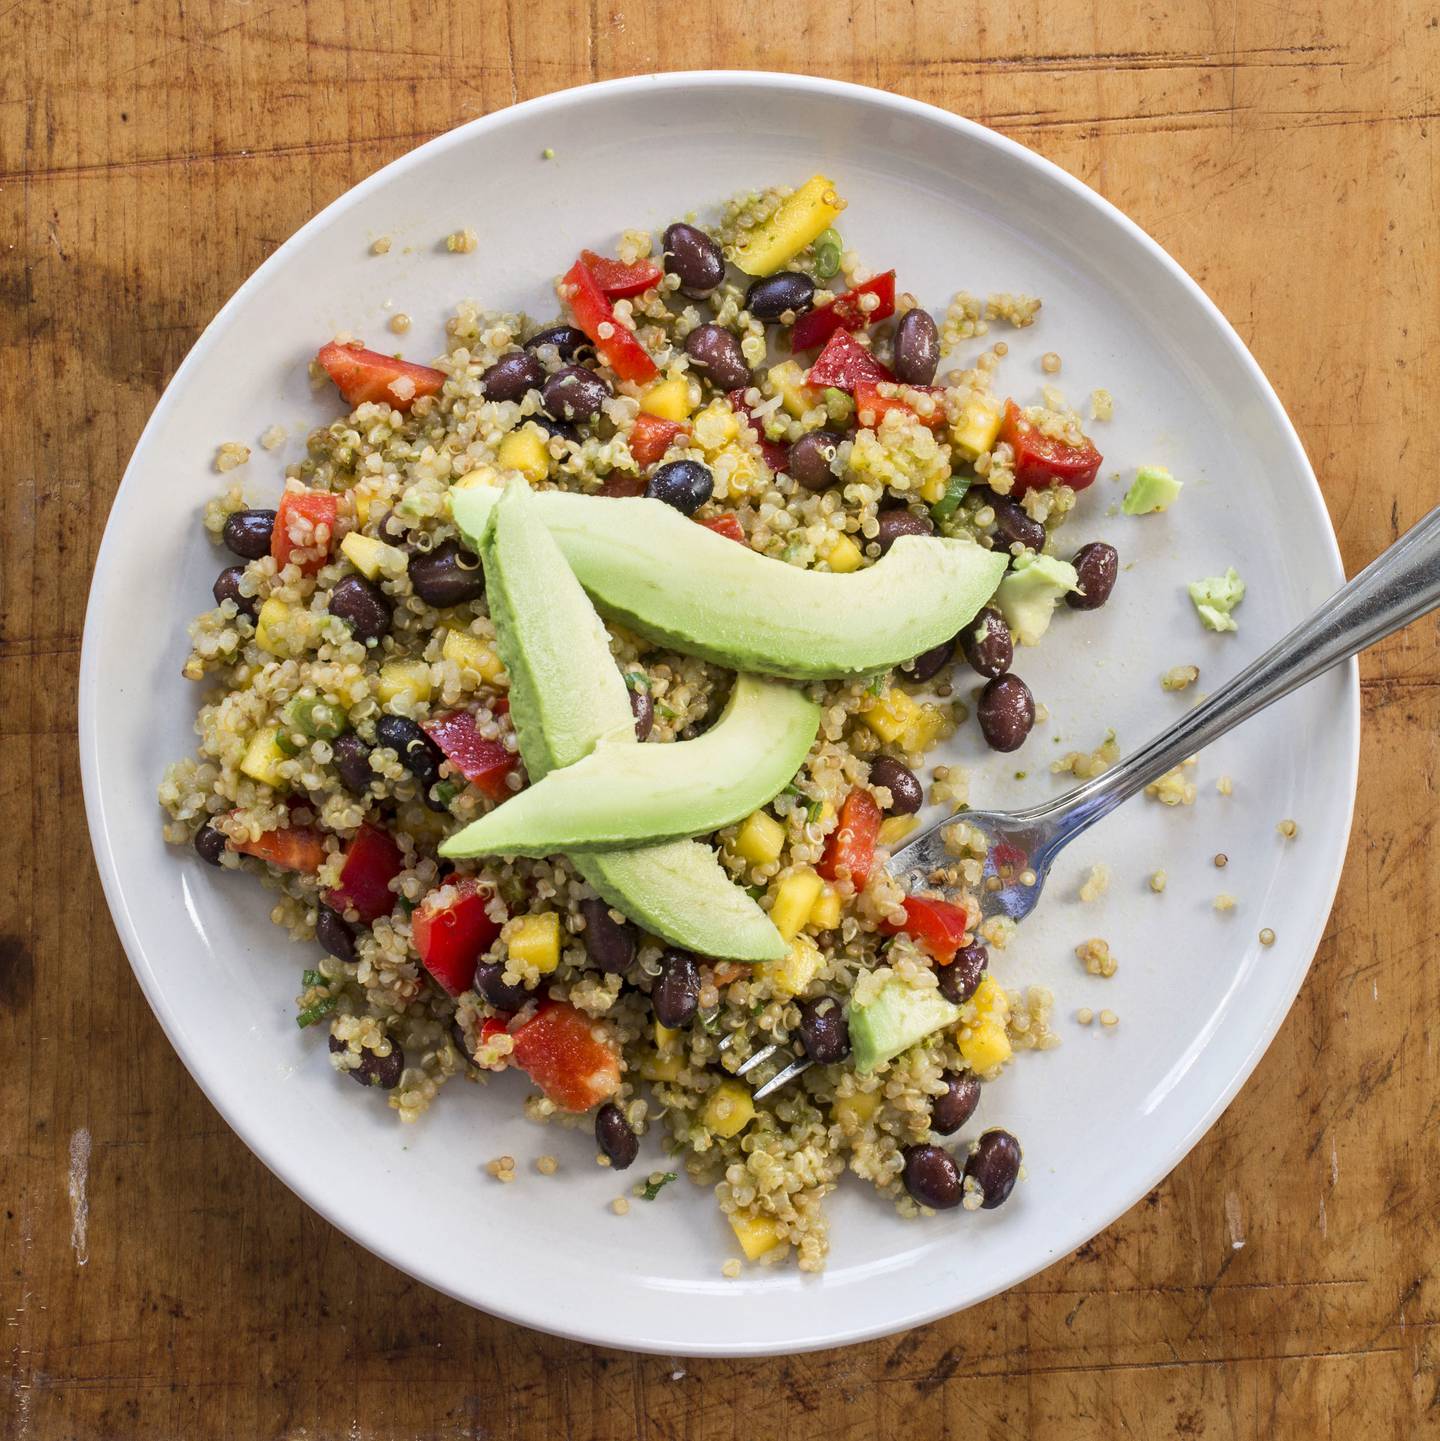 This undated photo provided by America's Test Kitchen in May 2018 shows a quinoa, black bean and mango salad in Brookline, Mass. This recipe appears in the cookbook â€œVegan For Everybody.â€ (Daniel J. van Ackere/America's Test Kitchen via AP)